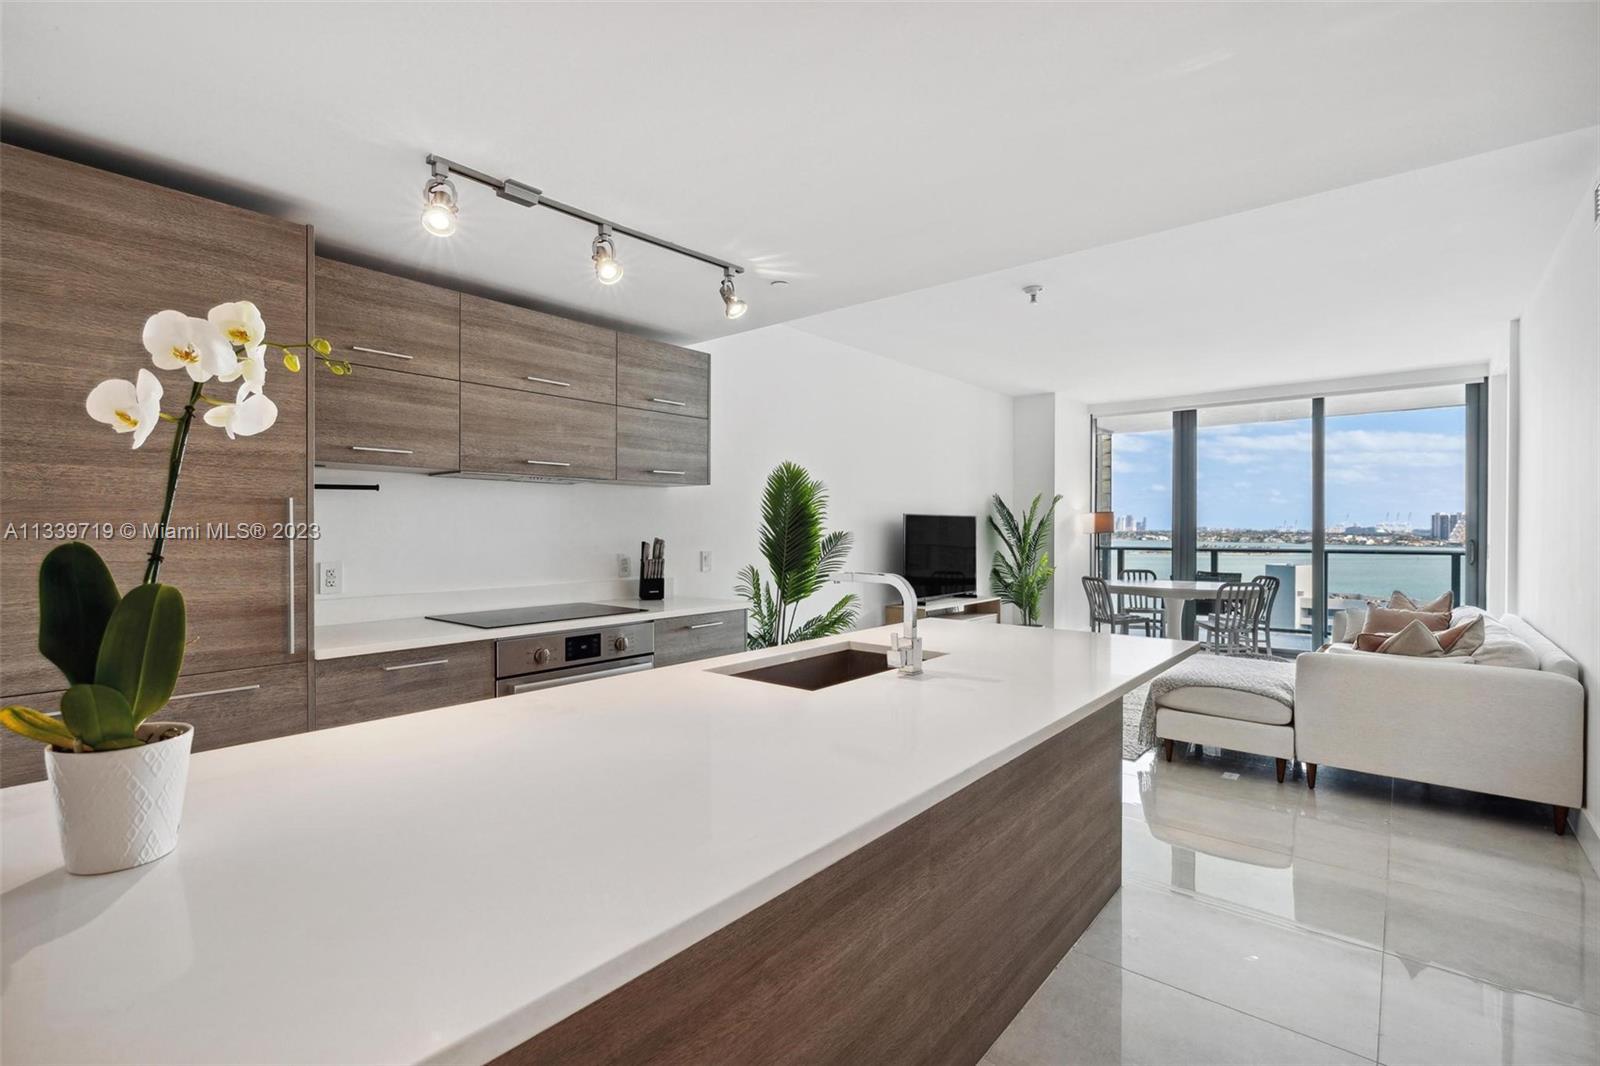 DIRECT BAY VIEWS from this 2BED/3BATH+DEN at the amazing PARAISO BAY offering the best amenities in 